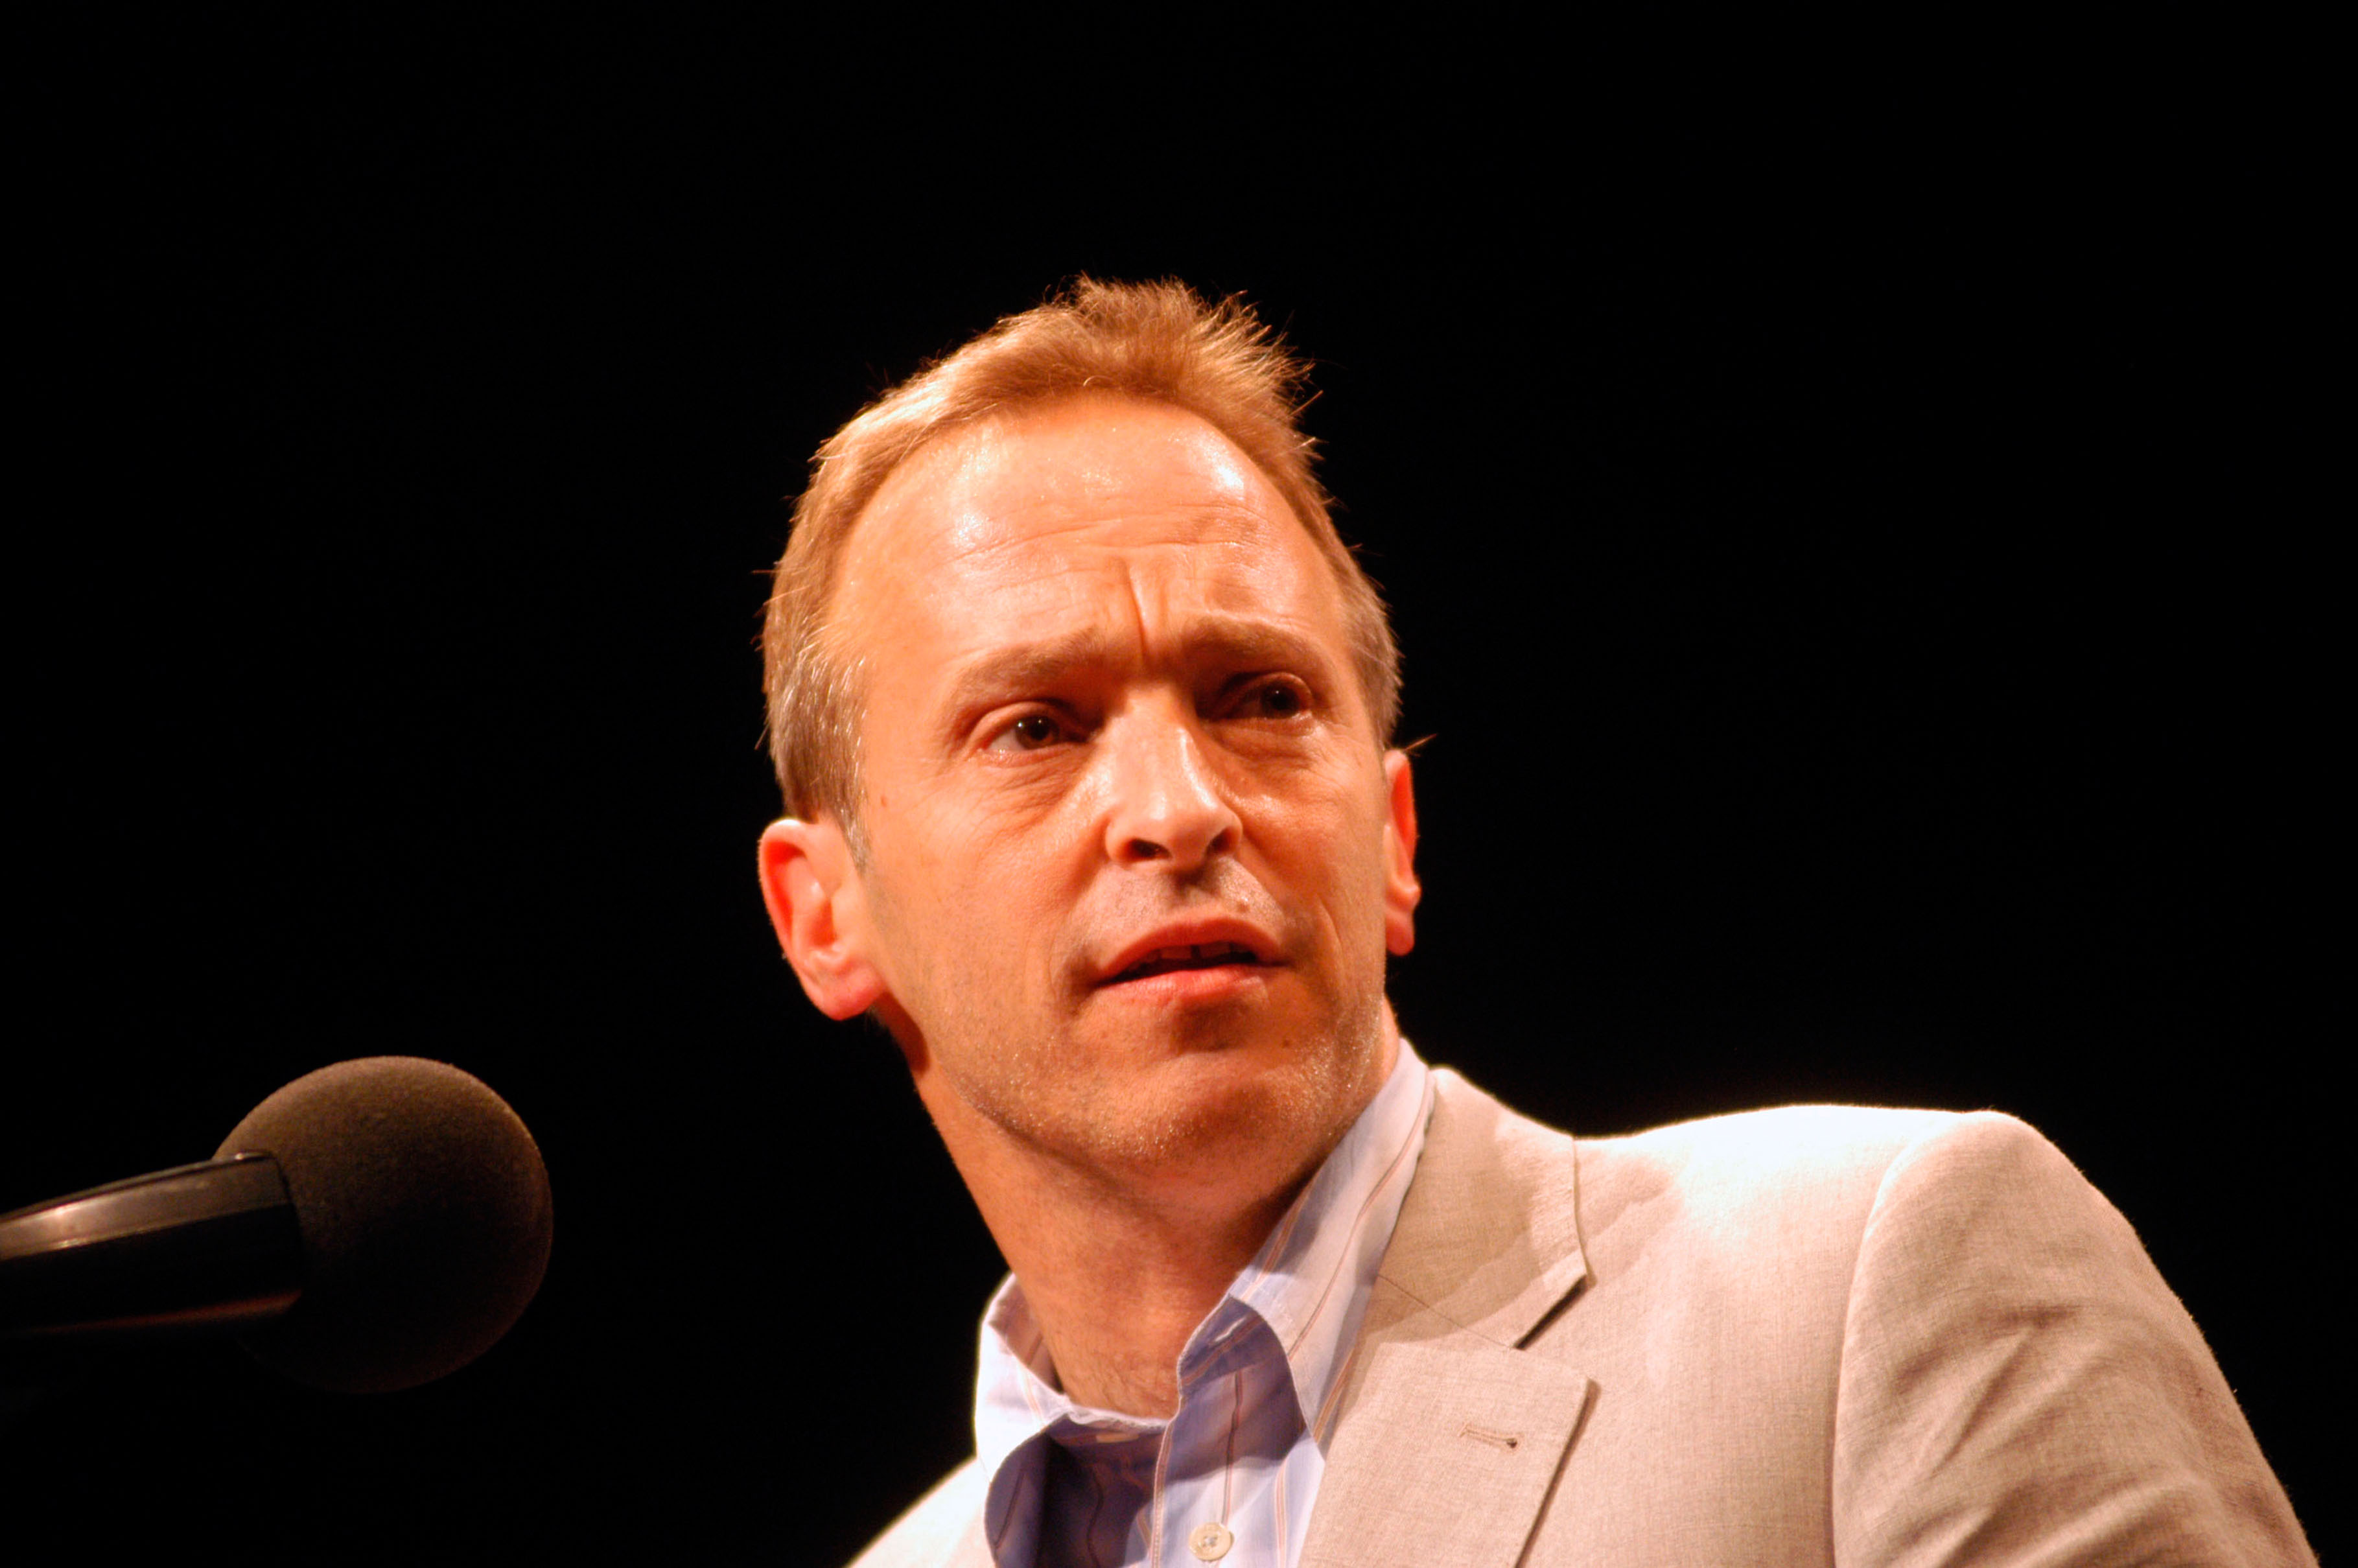 The author David Sedaris reads his short story The Living Dead in 2004